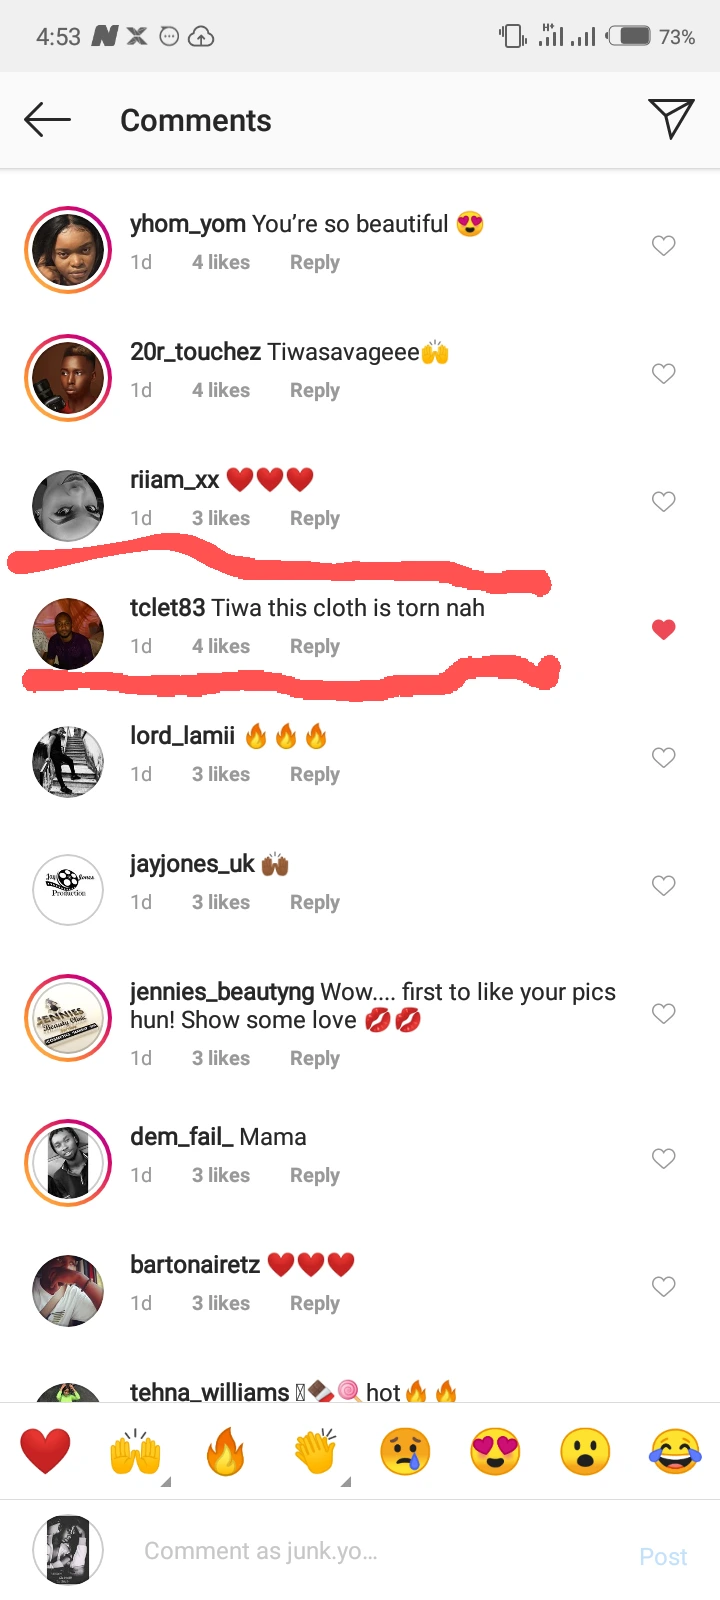 This cloth is torn na’ - Fan reacts to Tiwa Savage's dress in recent photo